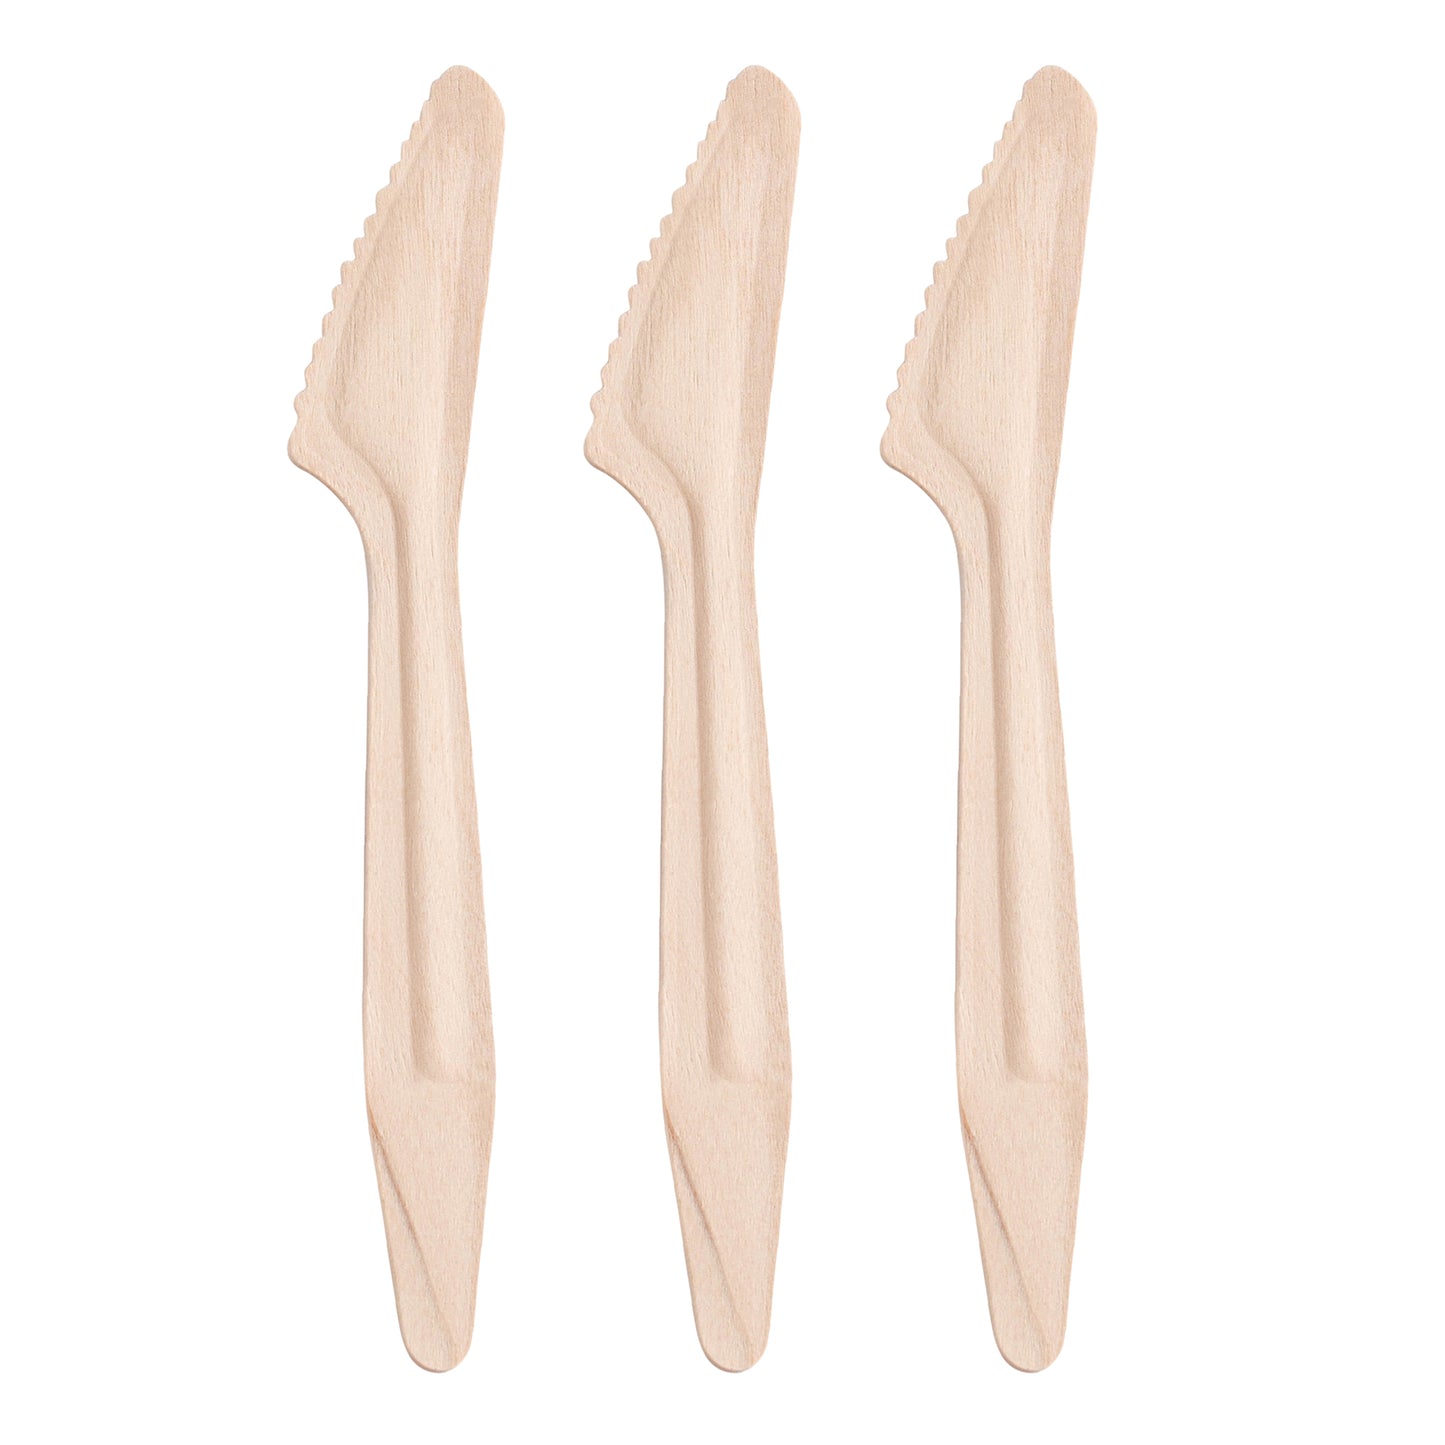 6.5" Natural Birch Disposable Eco-Friendly Dinner Knives